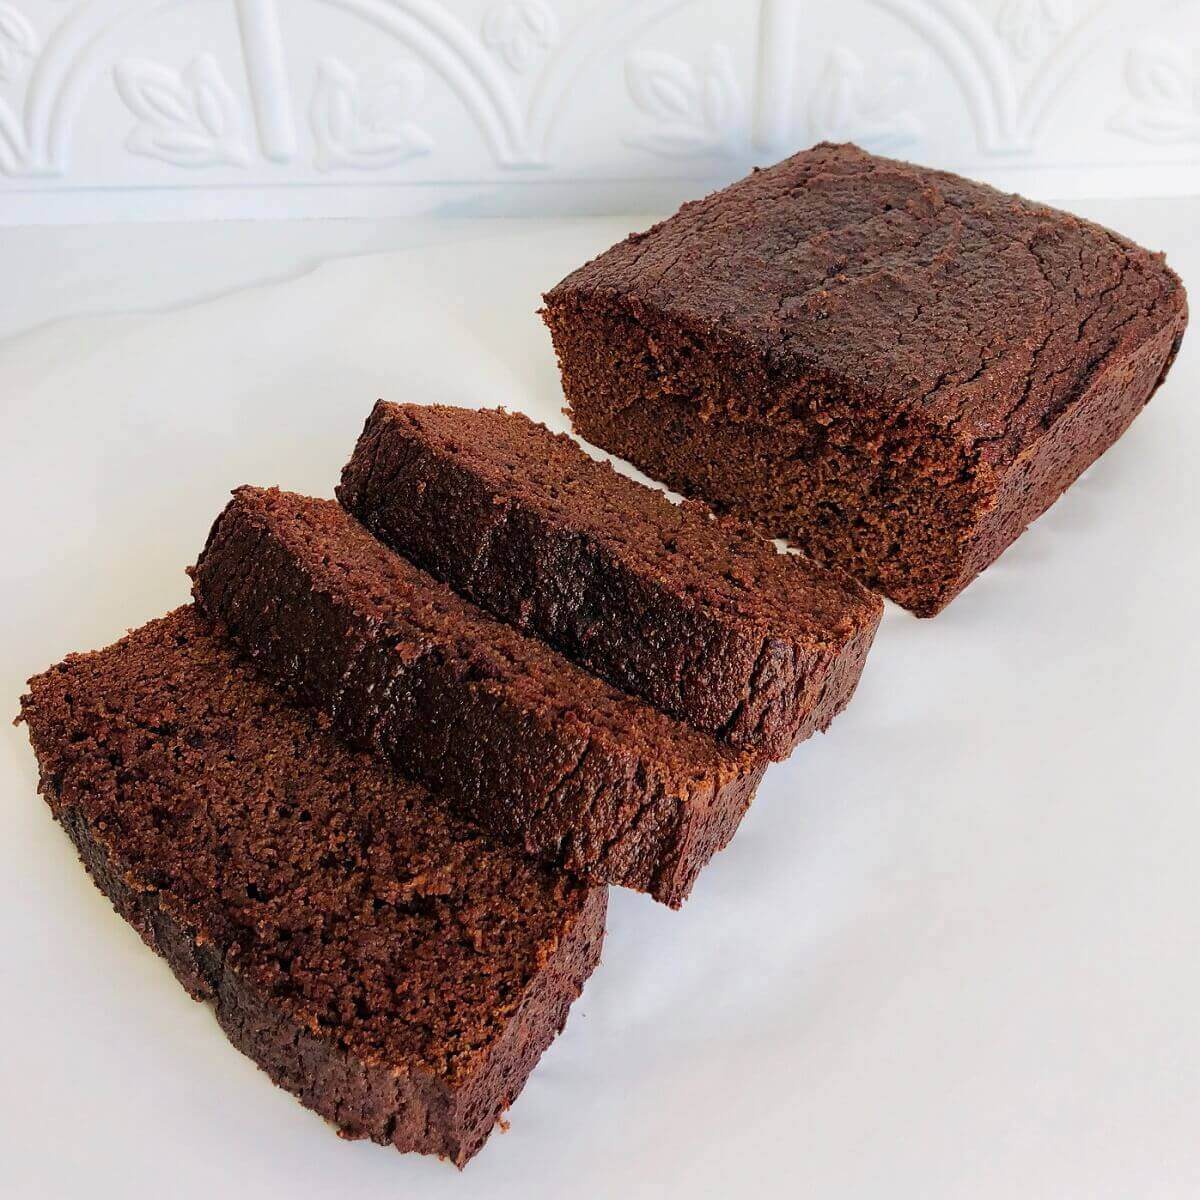 Three slices of chocolate loaf cake next to a larger hunk against a white background.